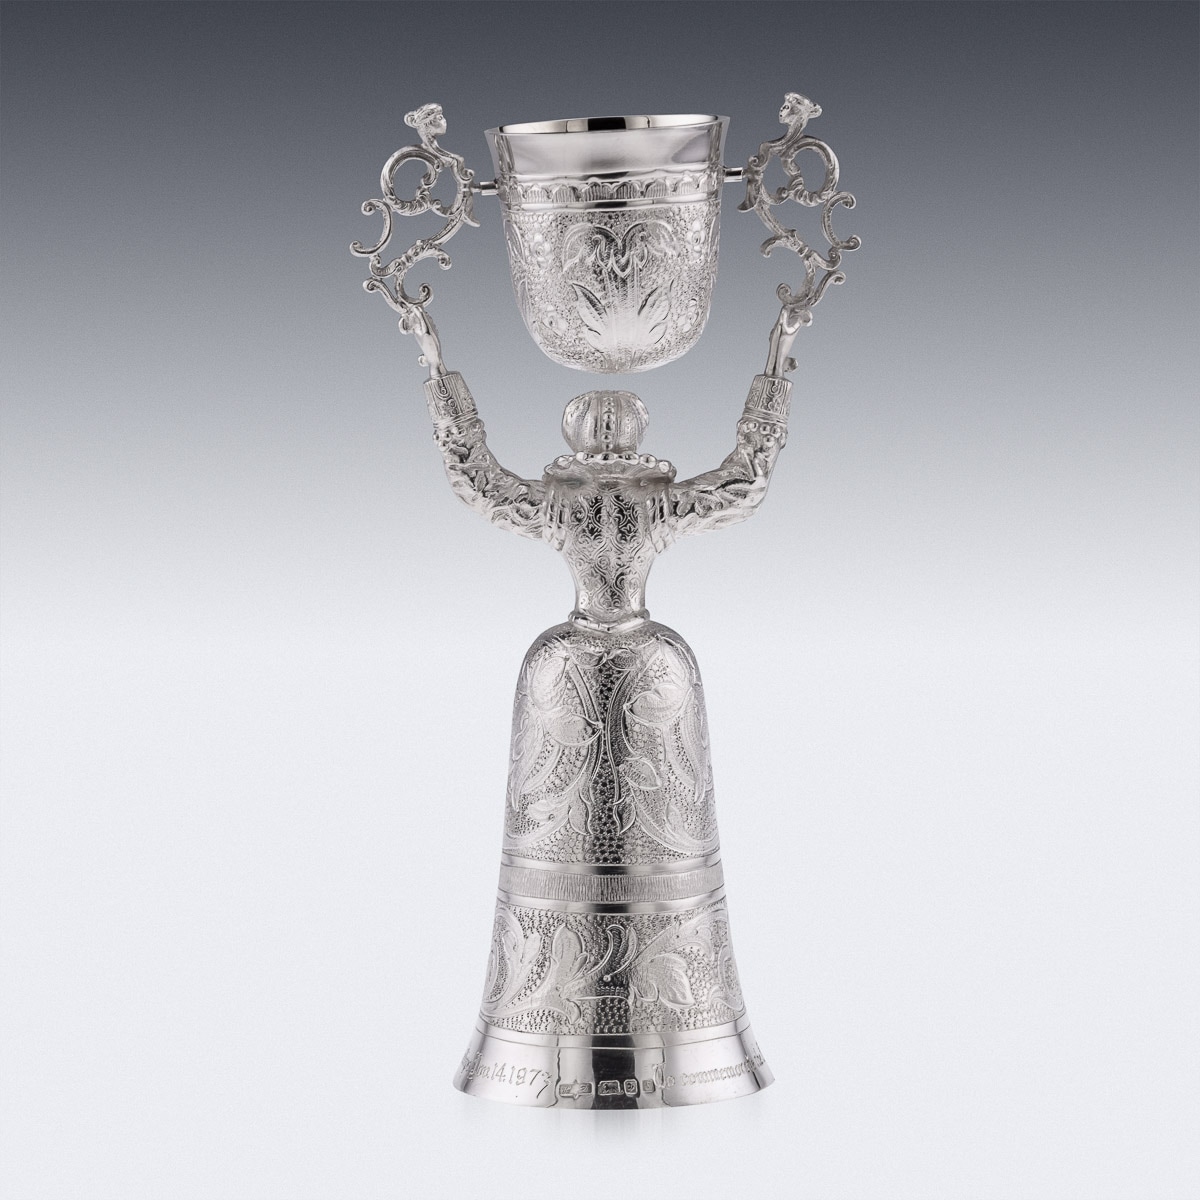 A ROYAL WEDDING SOLID STERLING SILVER NOVELTY WAGER CUP, LONDON, C. 1973 - Image 10 of 23